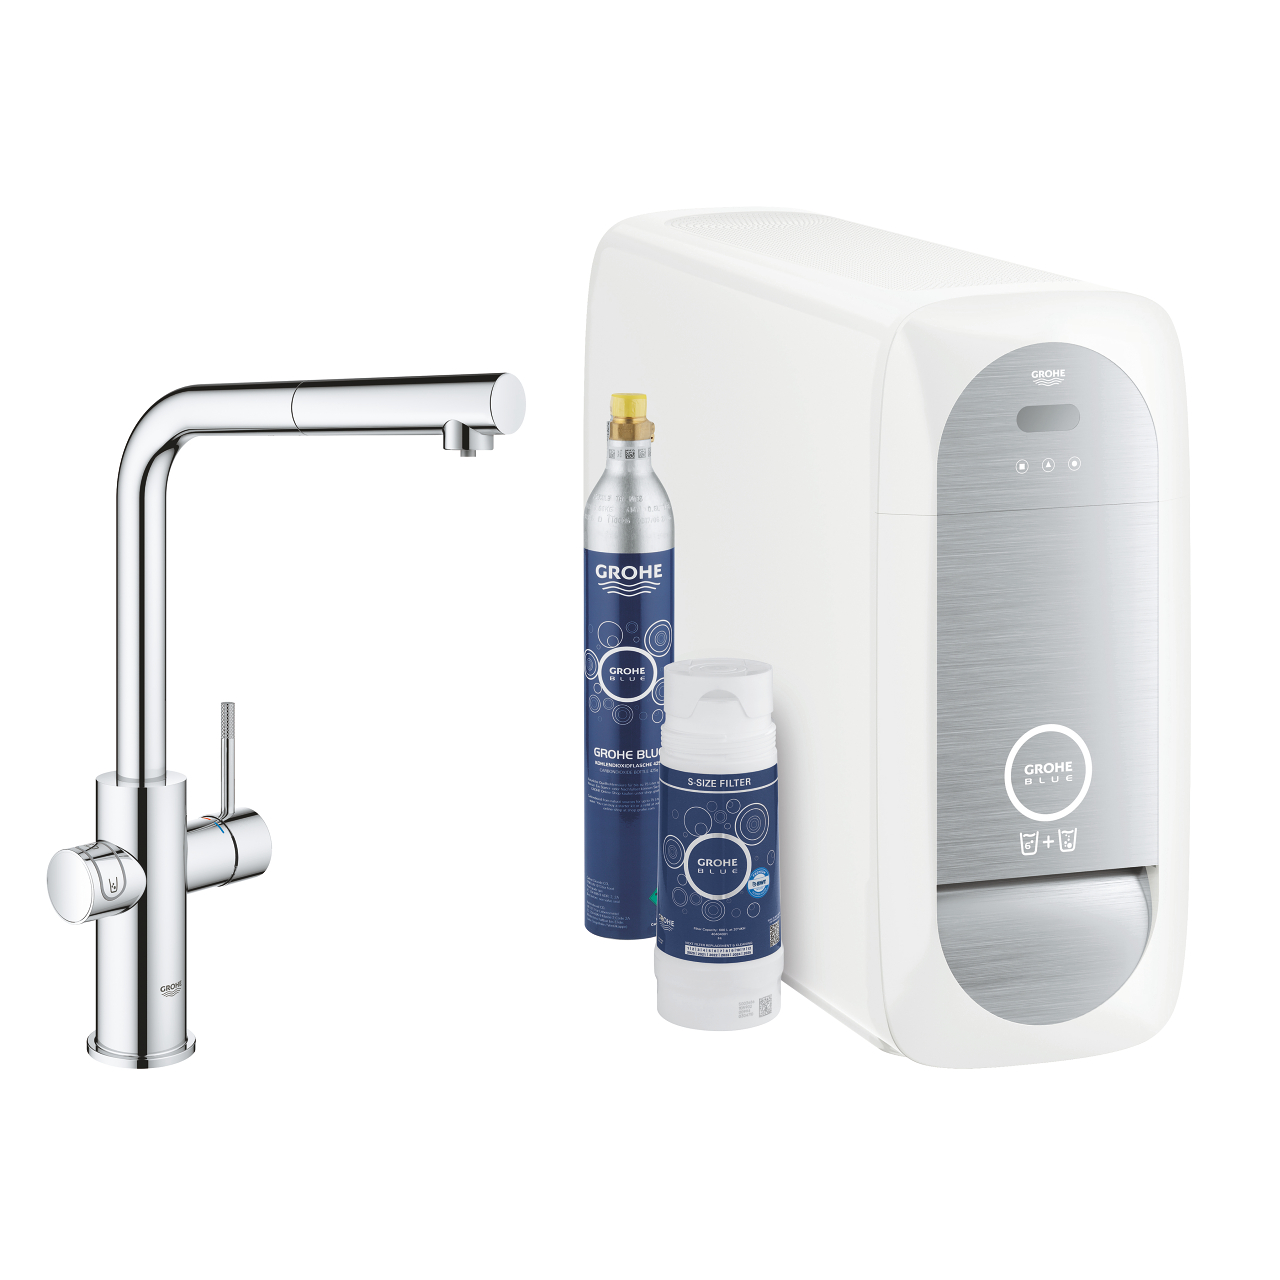 Baterie Bucatarie Grohe Blue Home Duo Cu Dus Extractibil Pipa L Sistem Filtrare Racire Si Carbonatare Starter Kit Crom ( 32.g 31539000.GHR )